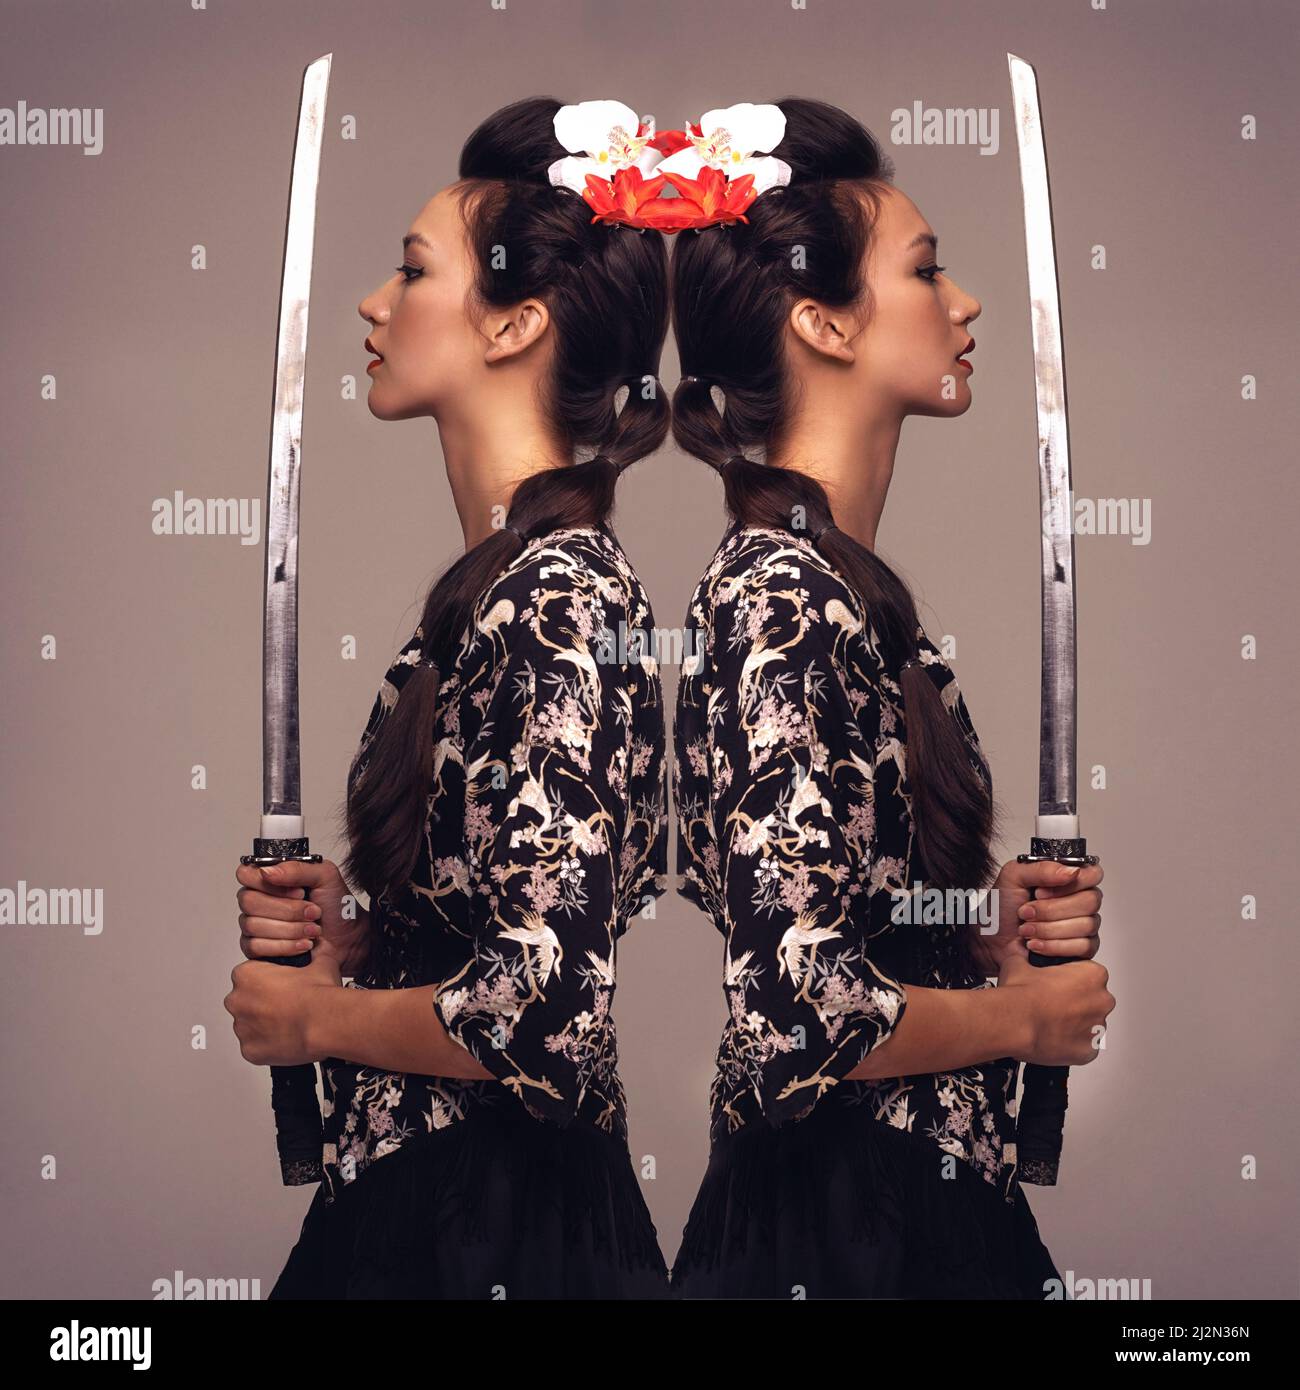 Shes a warrior. Mirrored studio shot of an attractive young woman holding a samurai sword. Stock Photo